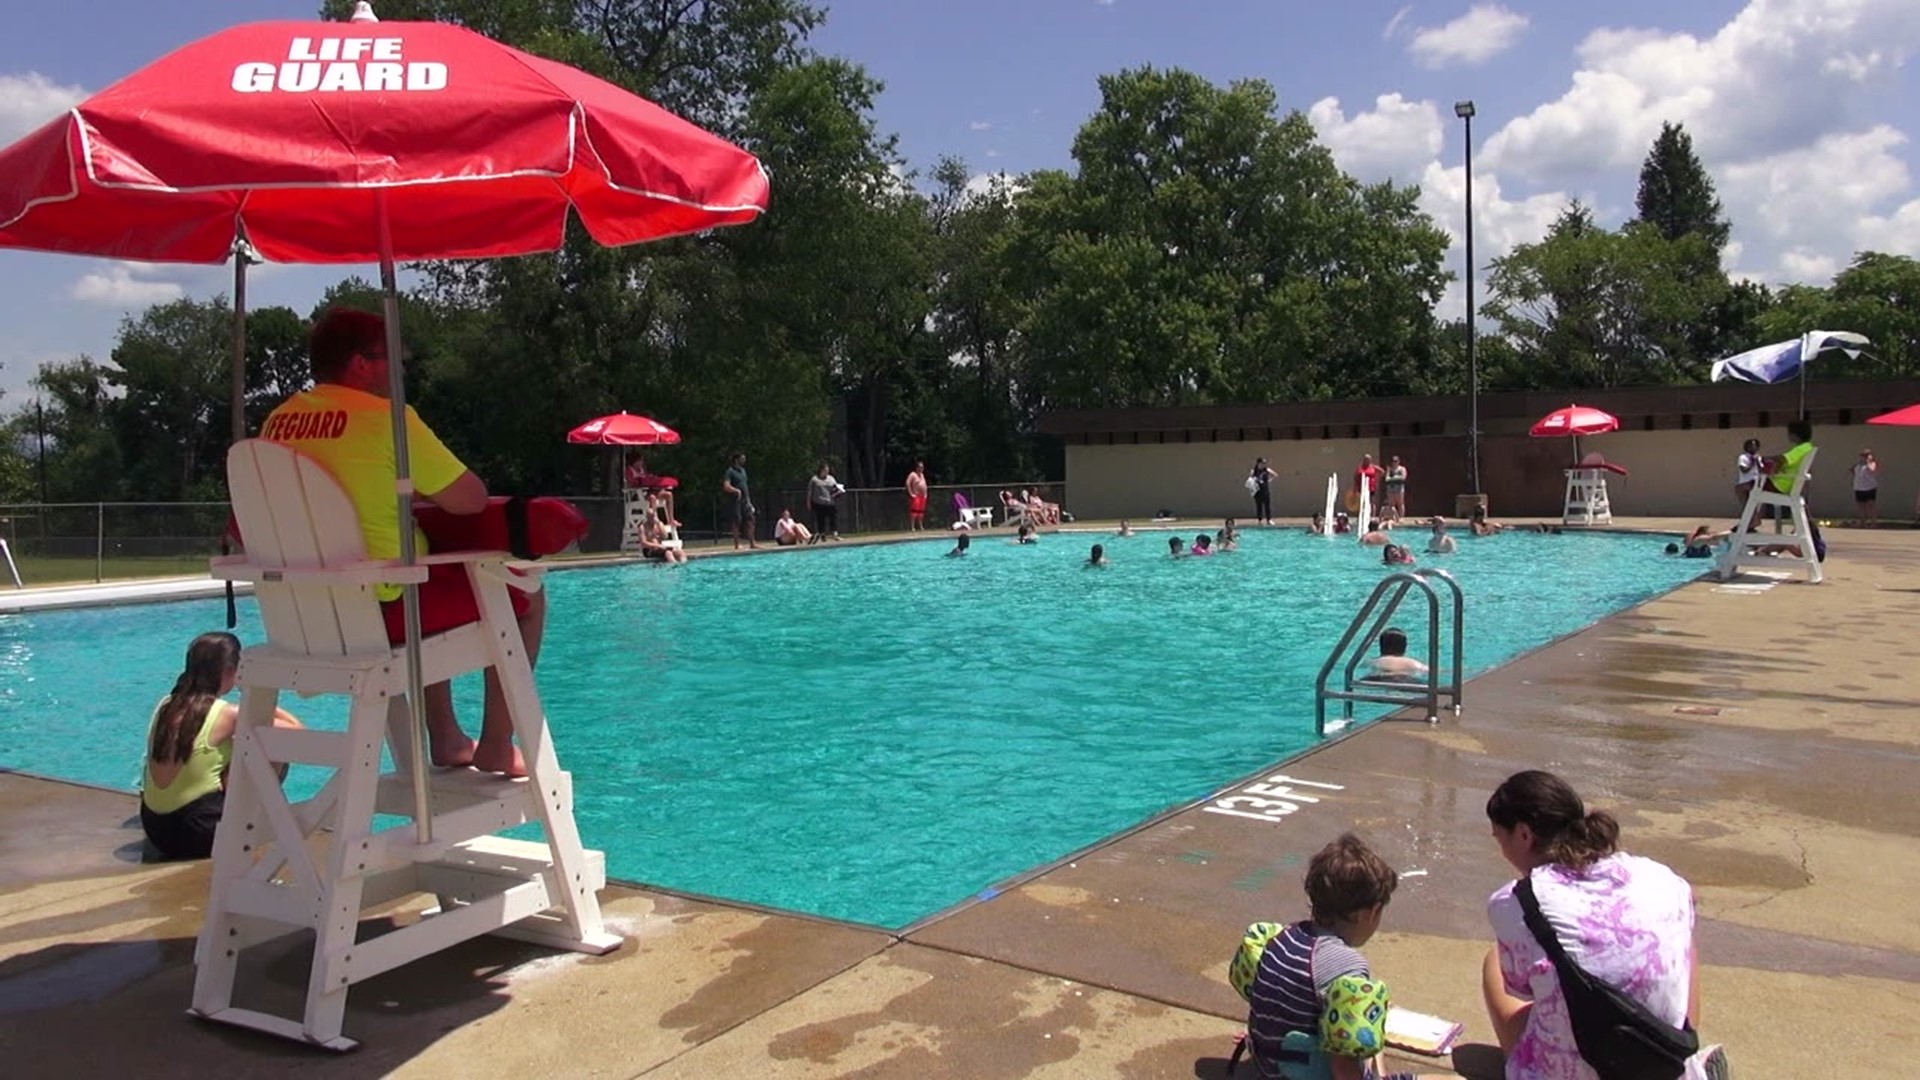 The Weston Park pool was open in the city's north end and it was already being put to good use in this heat.